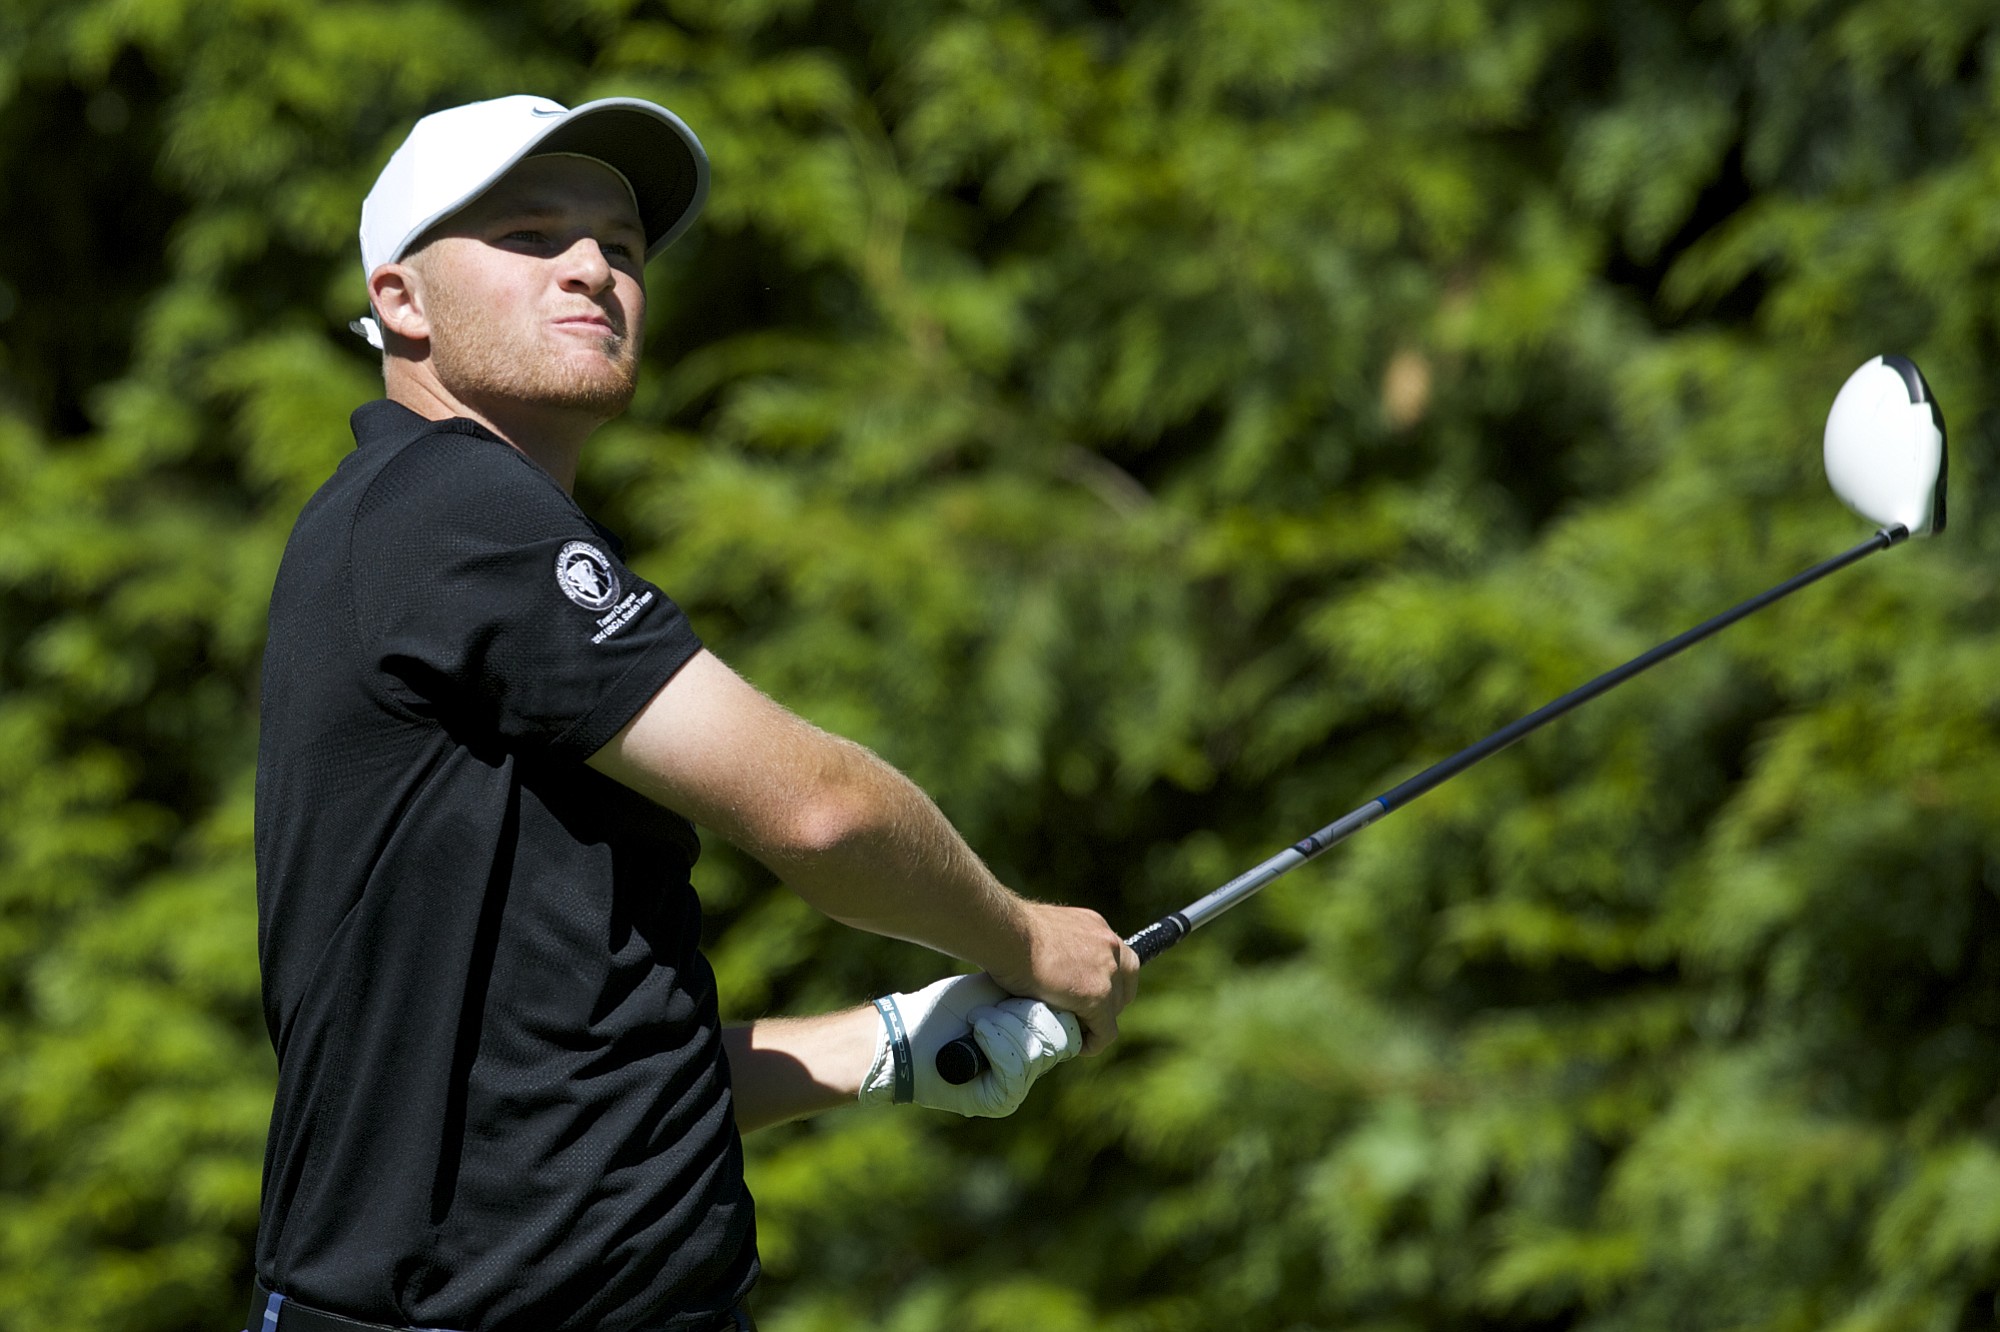 Jesse Heinly plays in the 2015 Royal Oaks Invitational, Friday, at Royal Oaks Country Club in Vancouver.